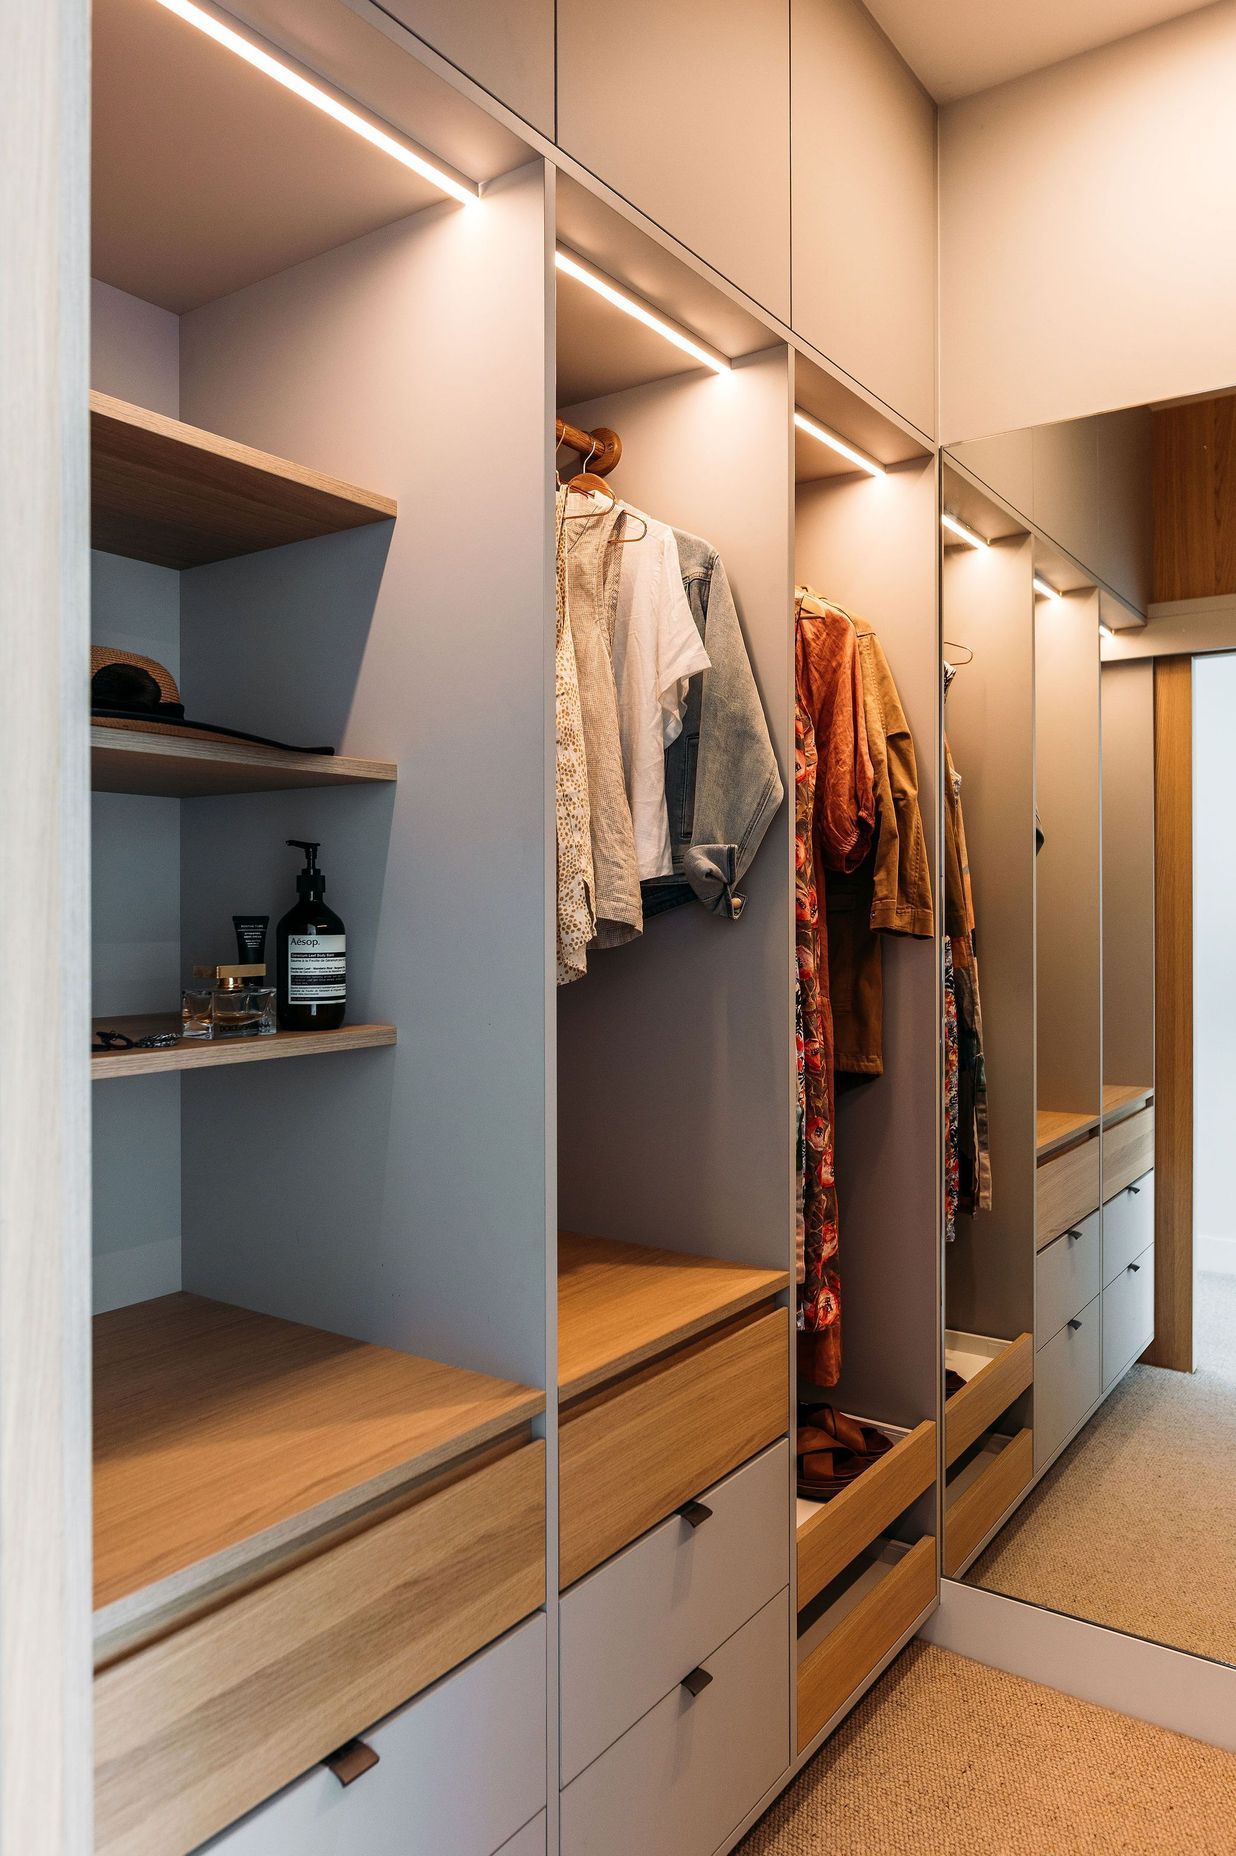 Modern, functional and stylish wardrobes.